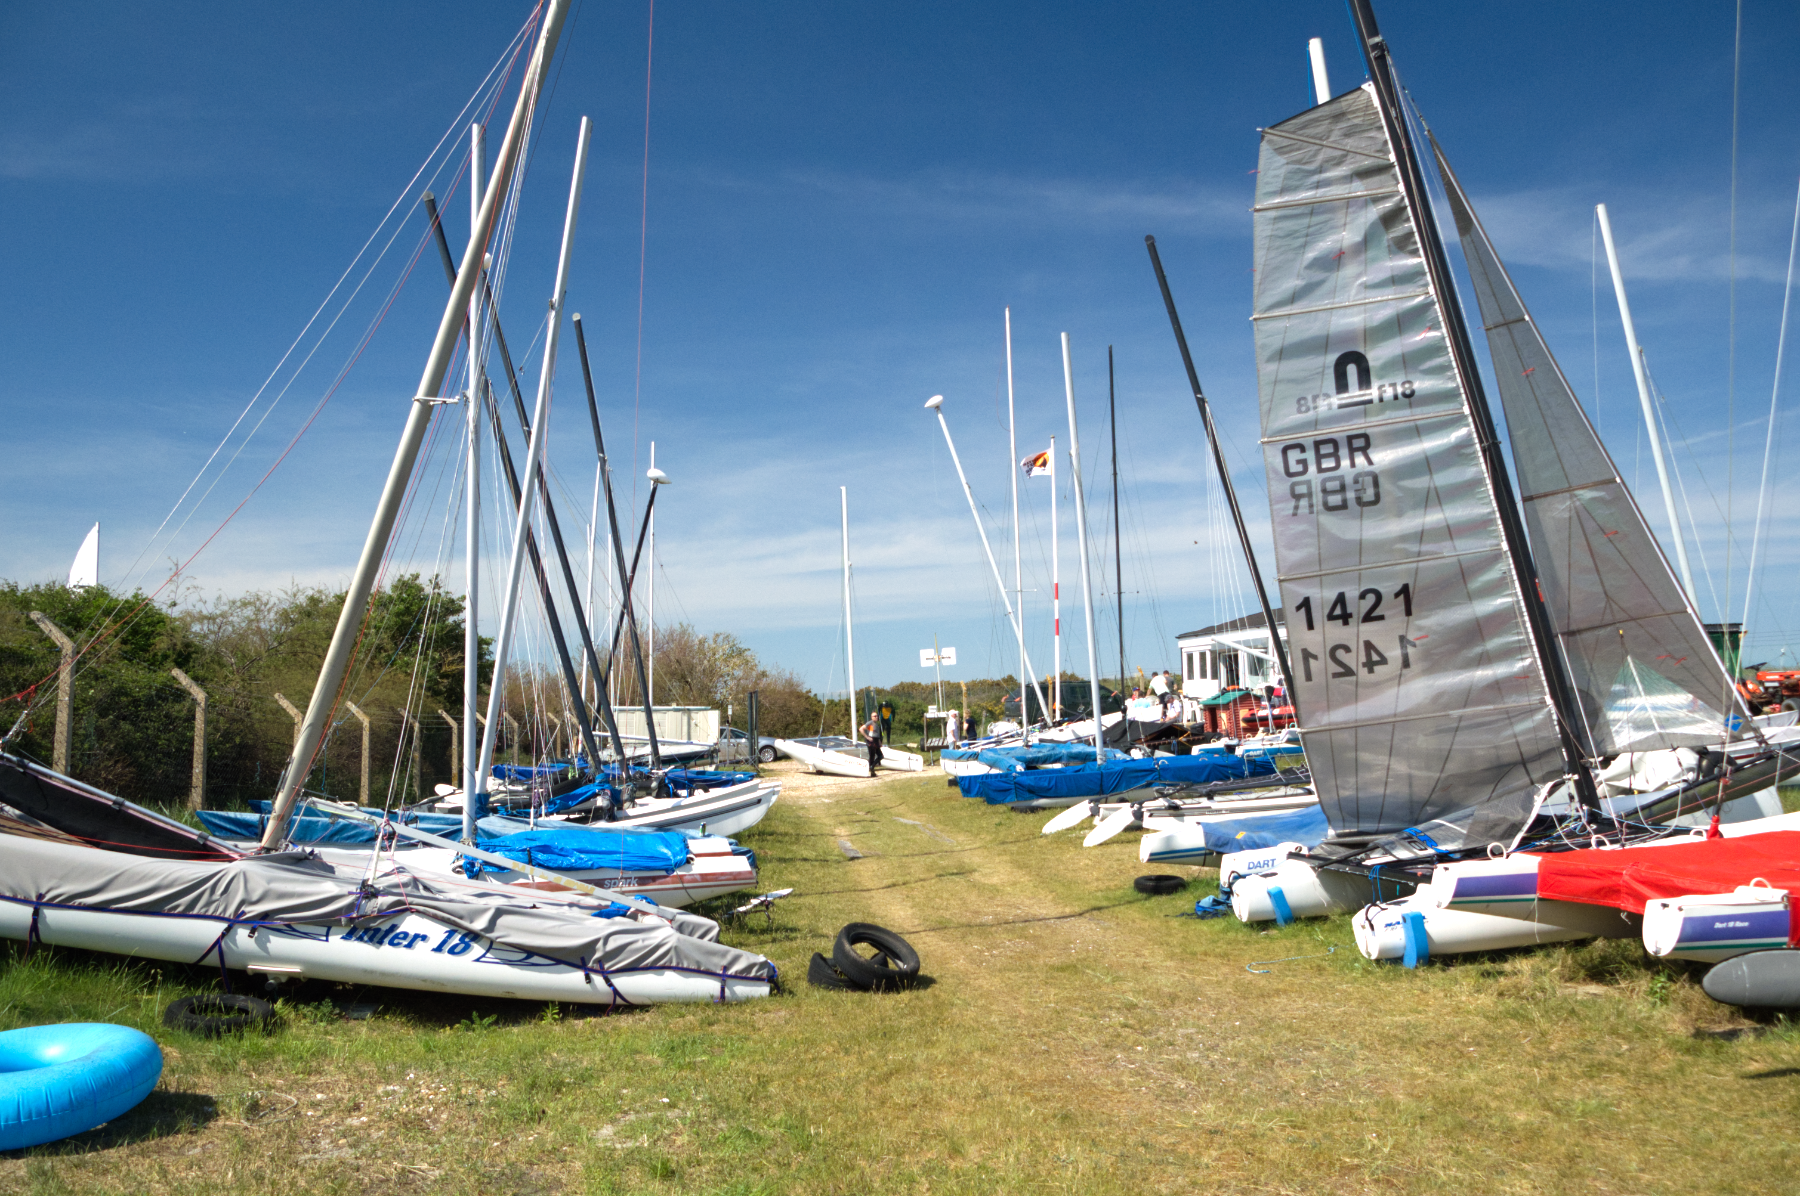 HFSC dinghy park and club house